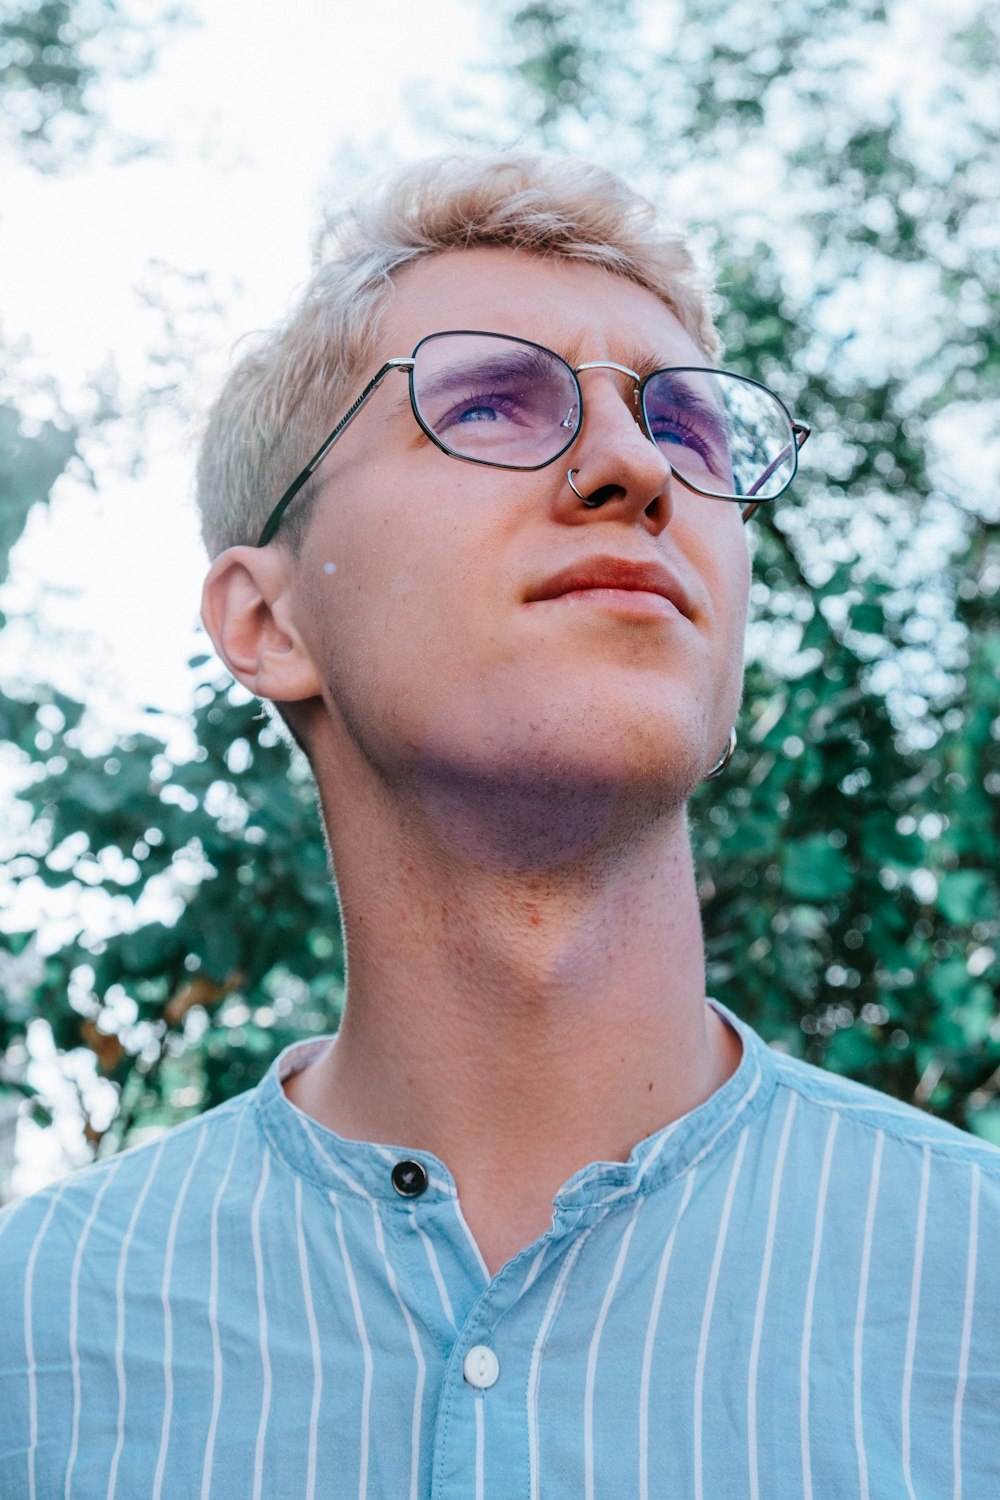 man in blue and white striped shirt wearing eyeglasses